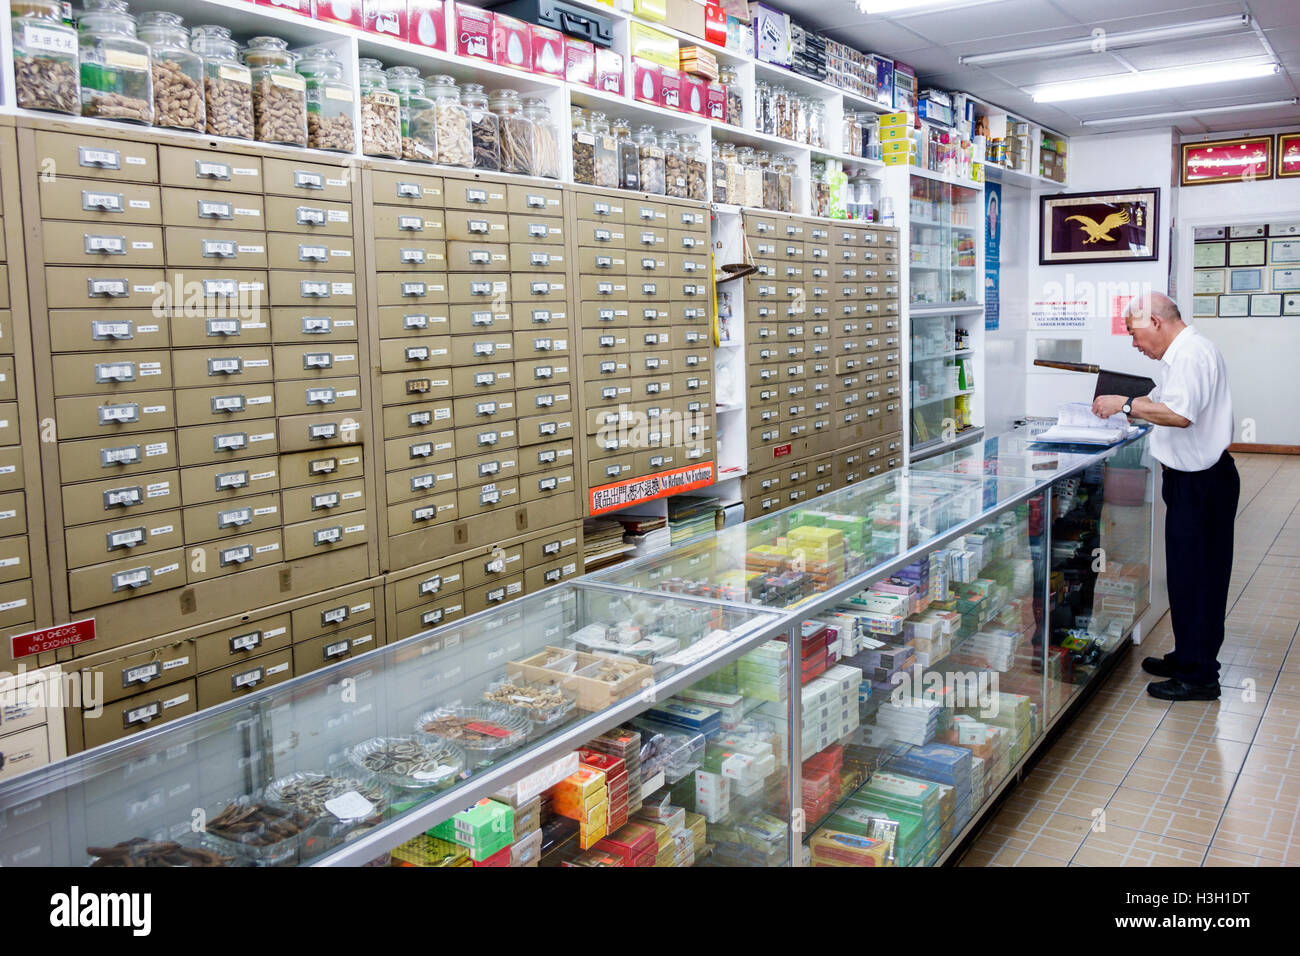 New York City,NY NYC Lower Manhattan,Chinatown,pharmacy,traditional Chinese medicine,herbs,herbal cures,counter,drawers,Asian adult,adults,man men mal Stock Photo